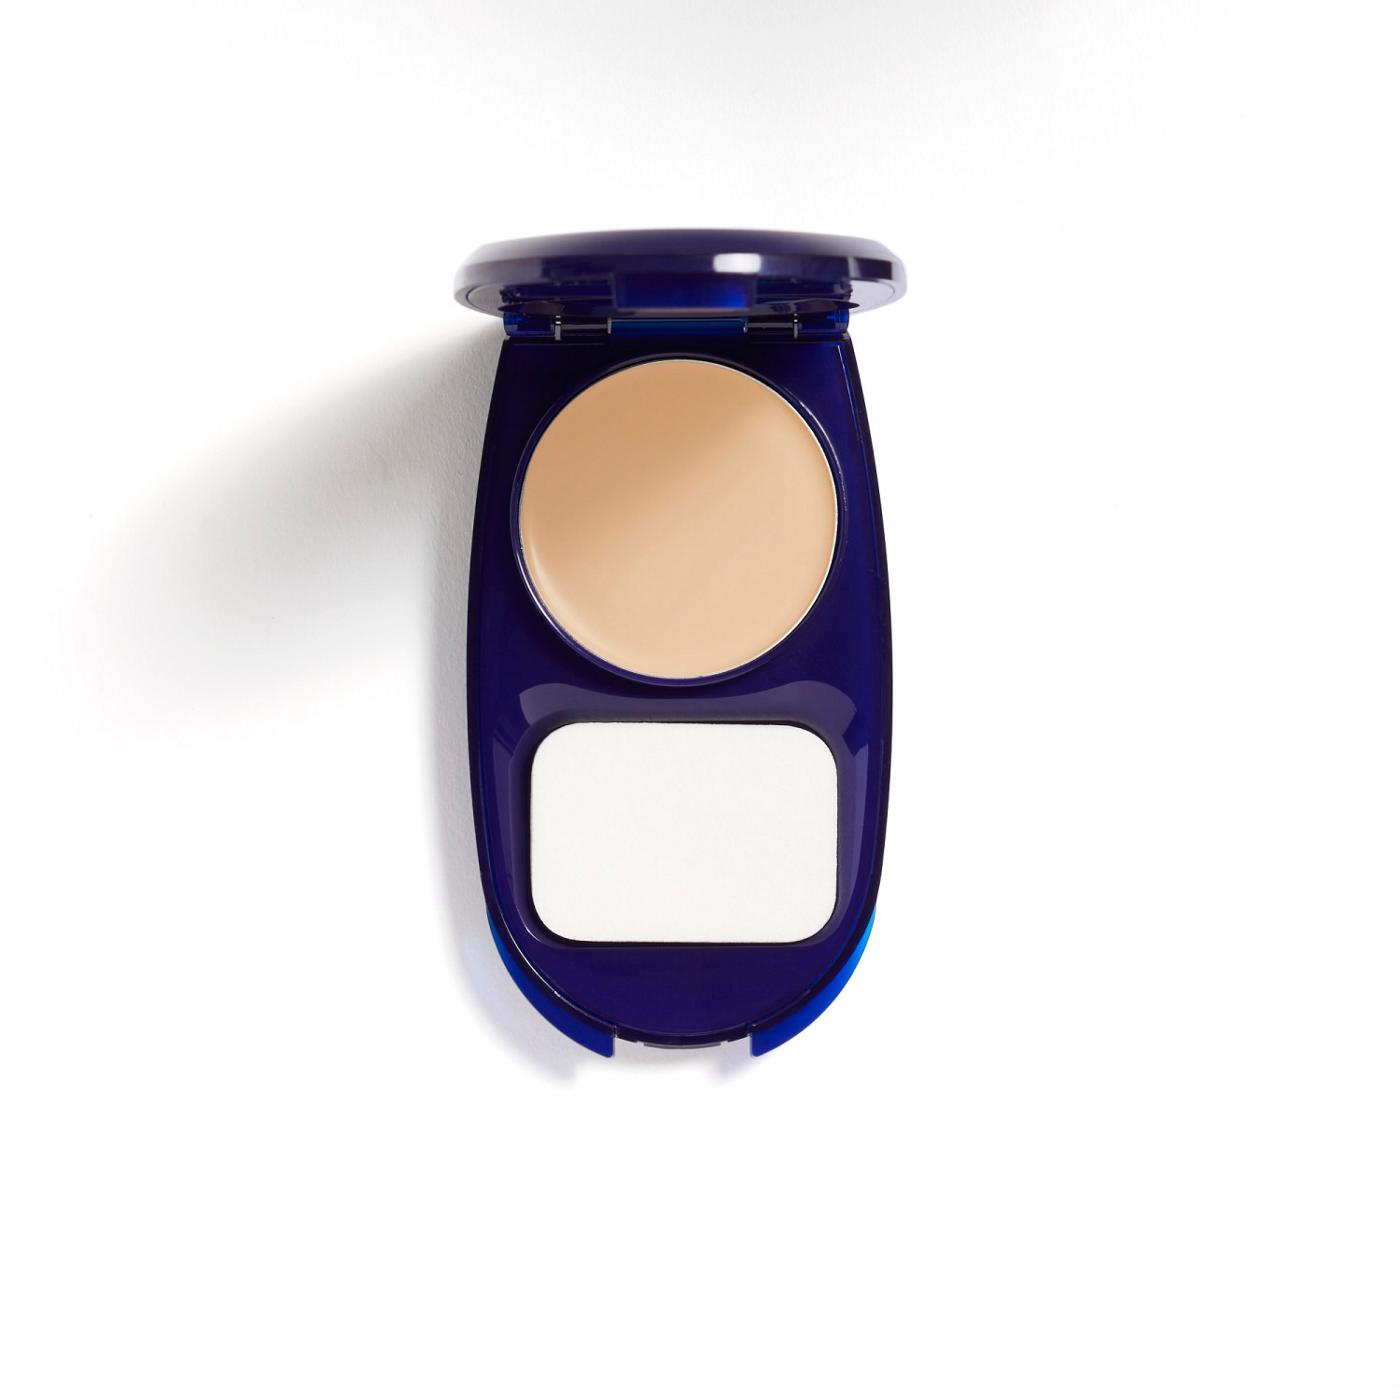 Covergirl Aqua Smooth Foundation Compact 725 Buff Beige; image 2 of 3